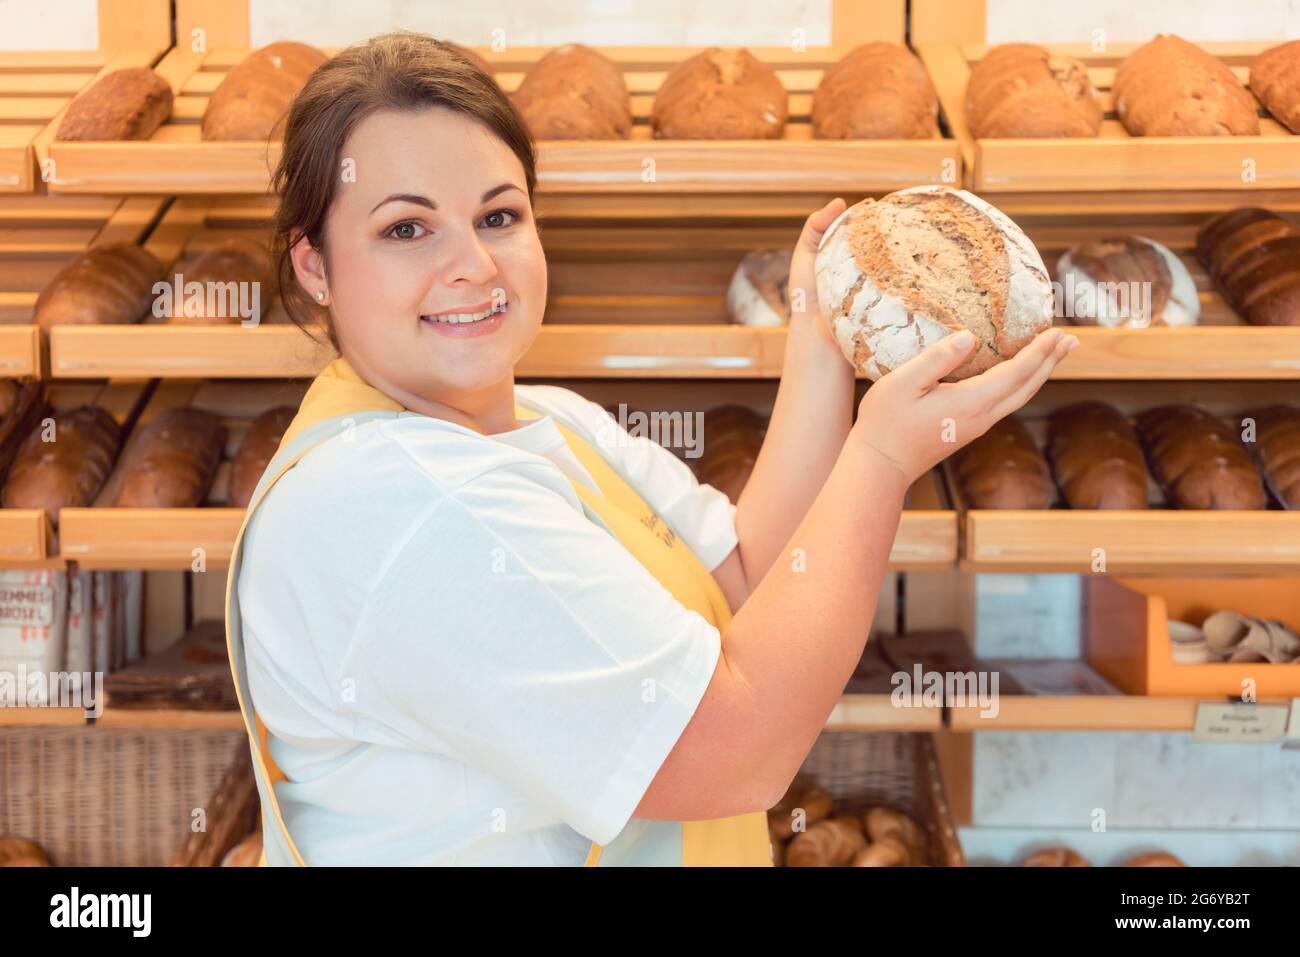 Saleslady in bakery shop presenting bread to potential buyer Stock Photo